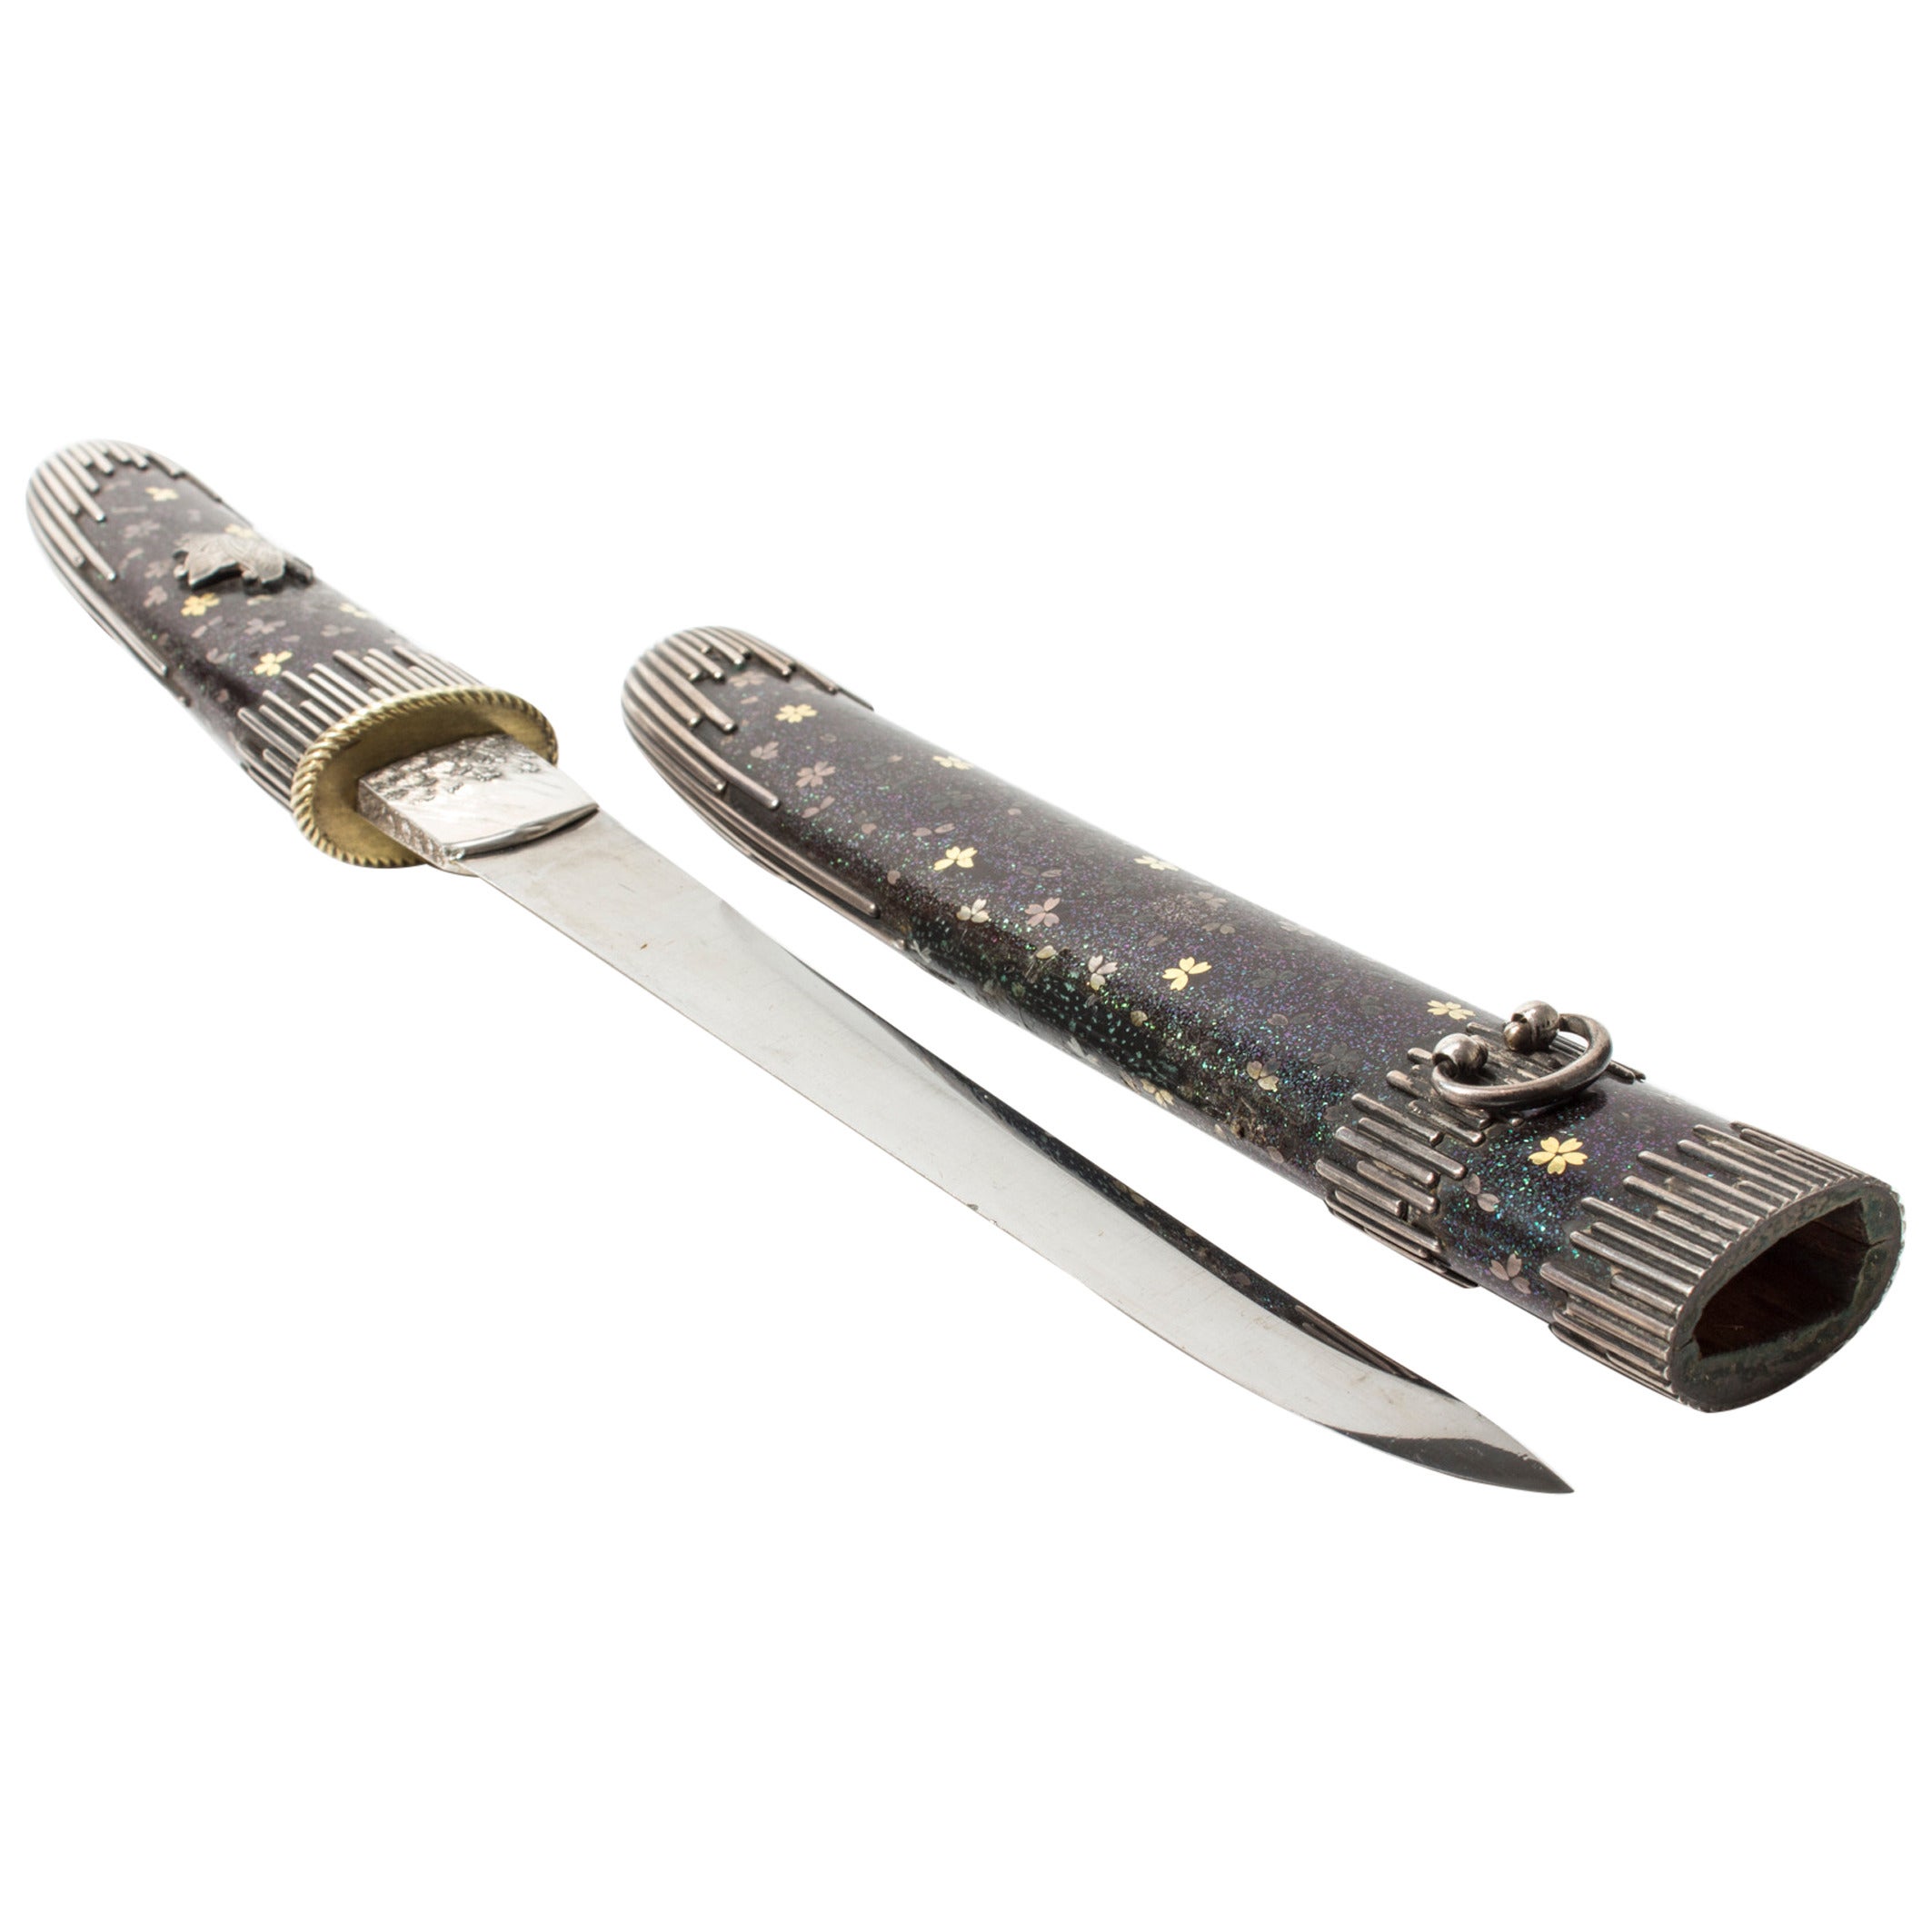 Excessivly Decorated Anonym Meiji Period Aikuchi Tanto with Rich Maik-E Inlay